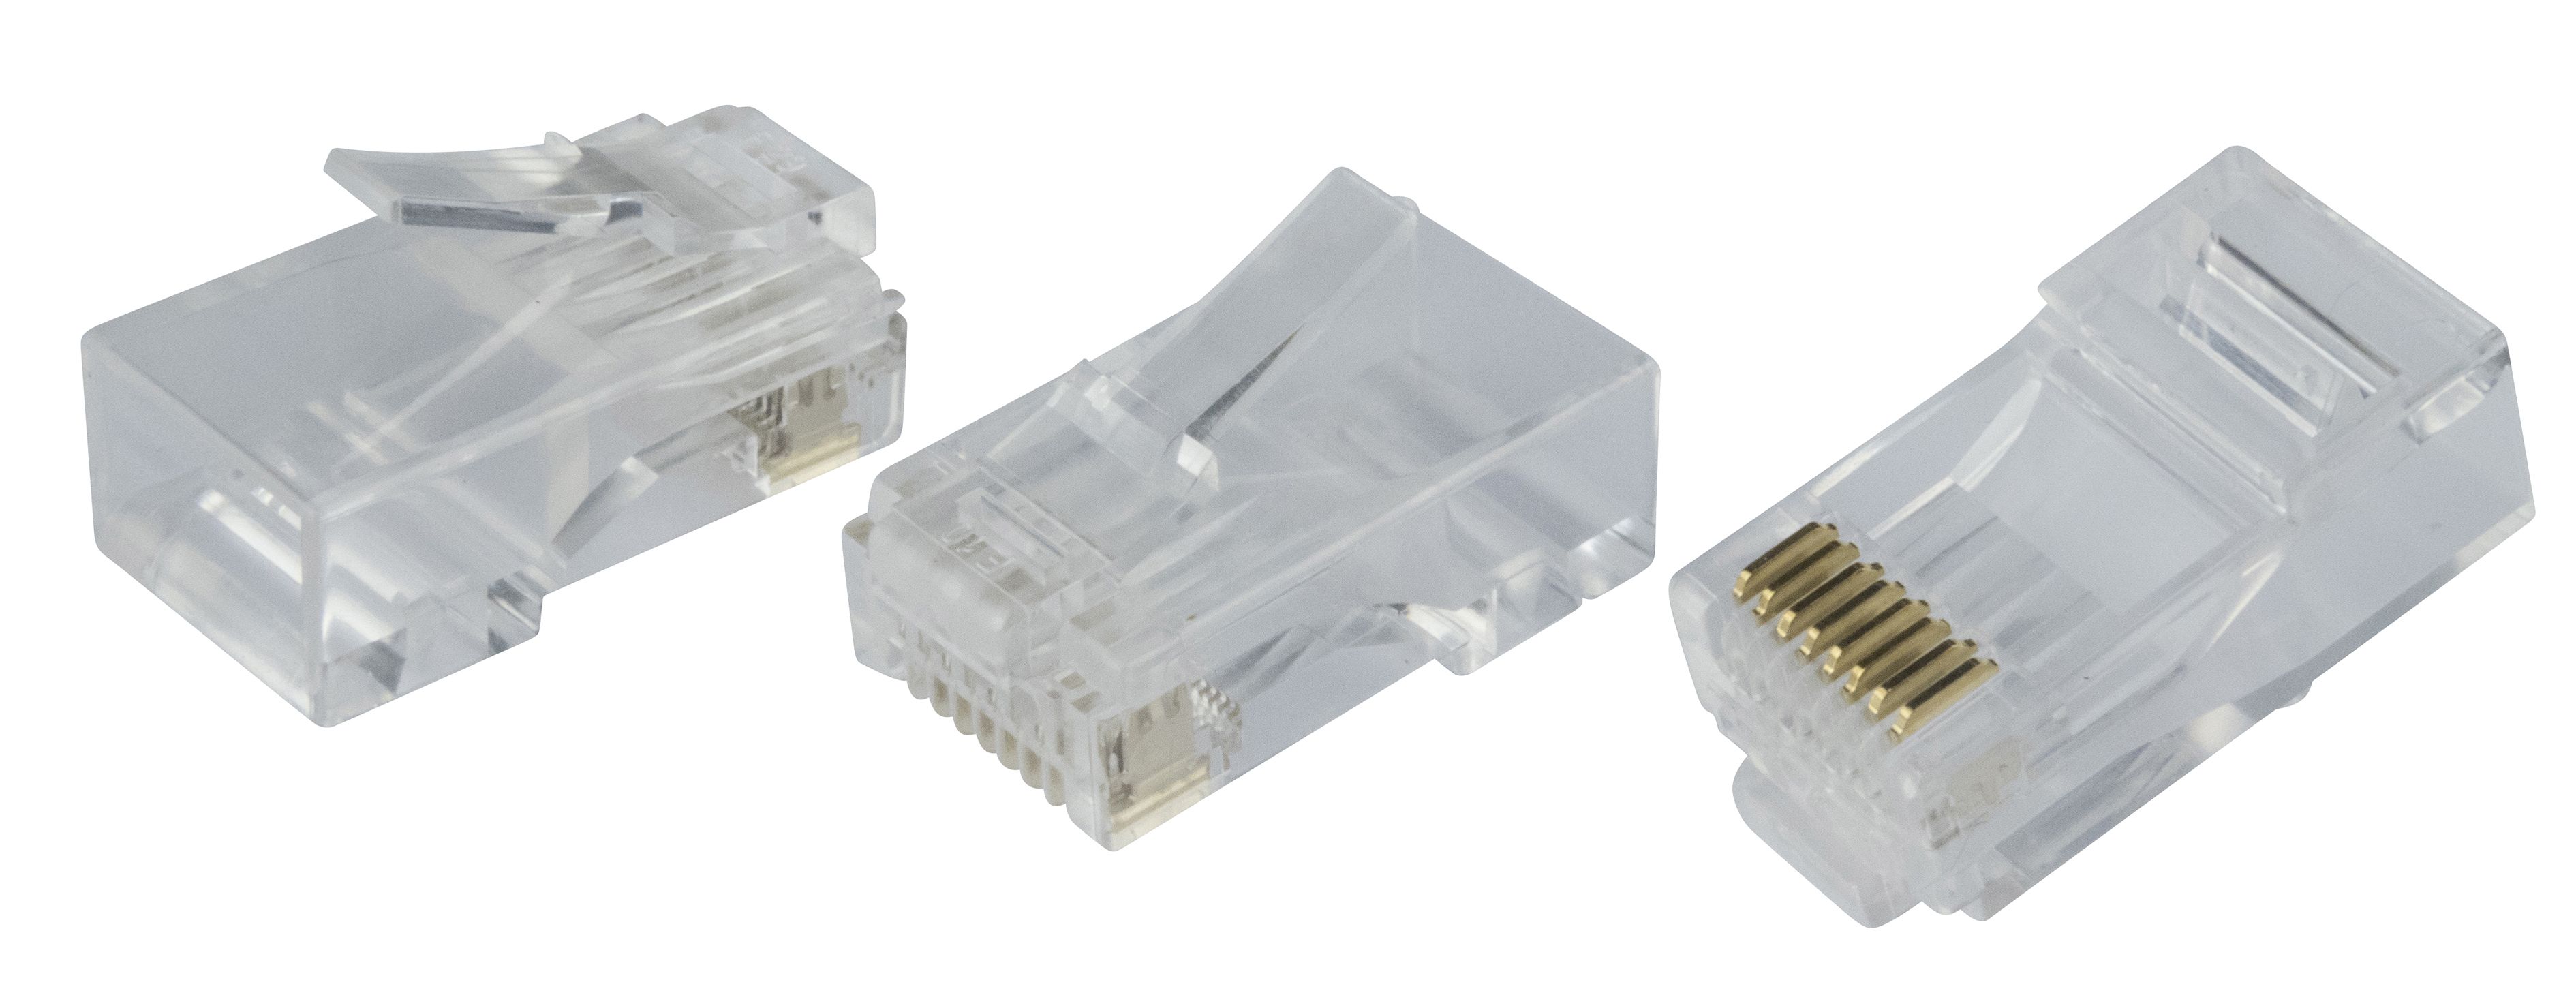 SLX CAT 5E RJ45 Clear 1 way Cable connector, Pack of 10